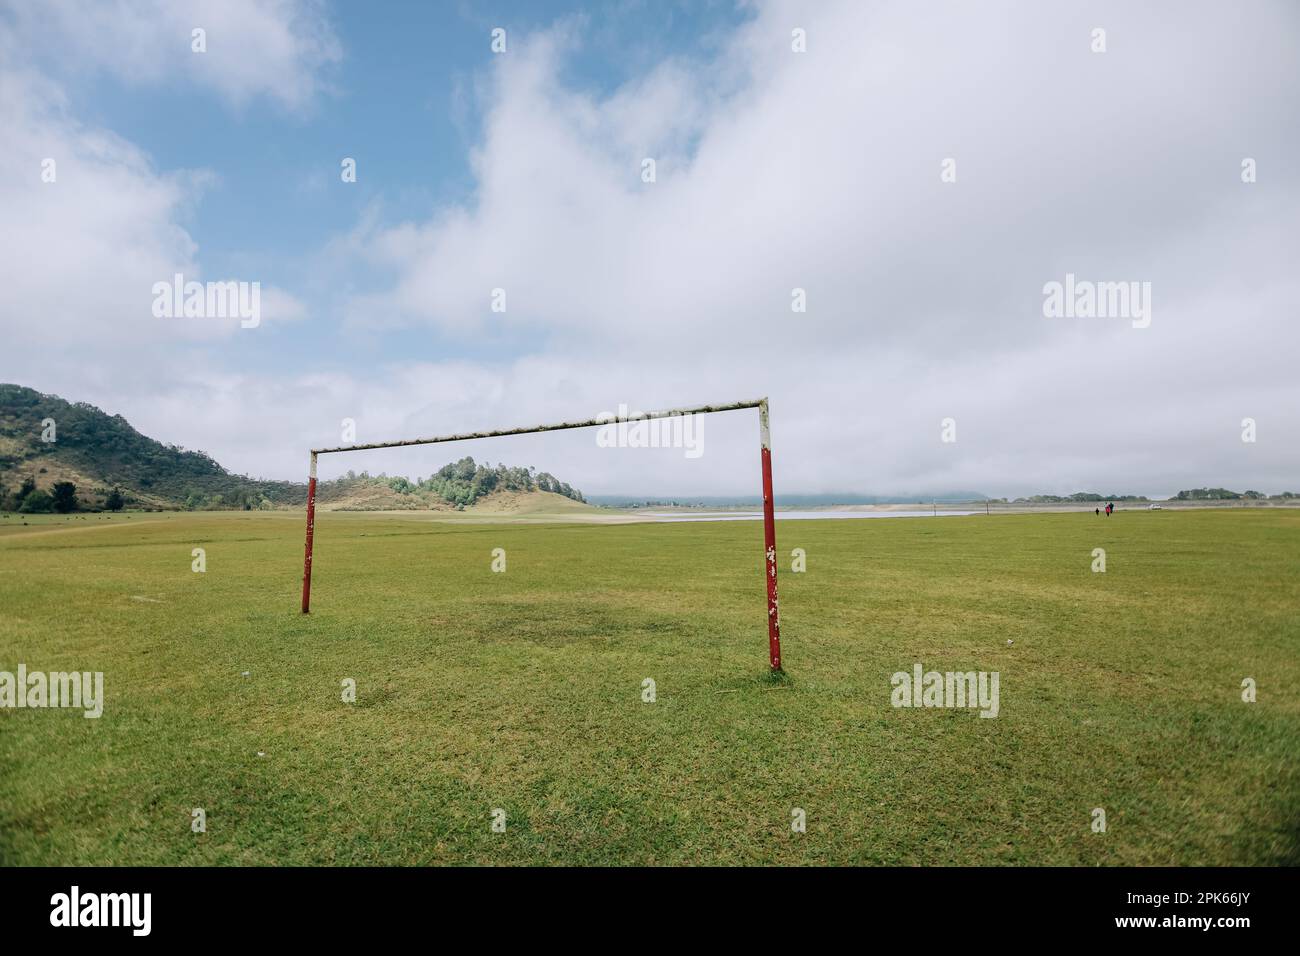 Rusty and abandoned soccer goal in a field of Tenango de Las Flores Stock Photo